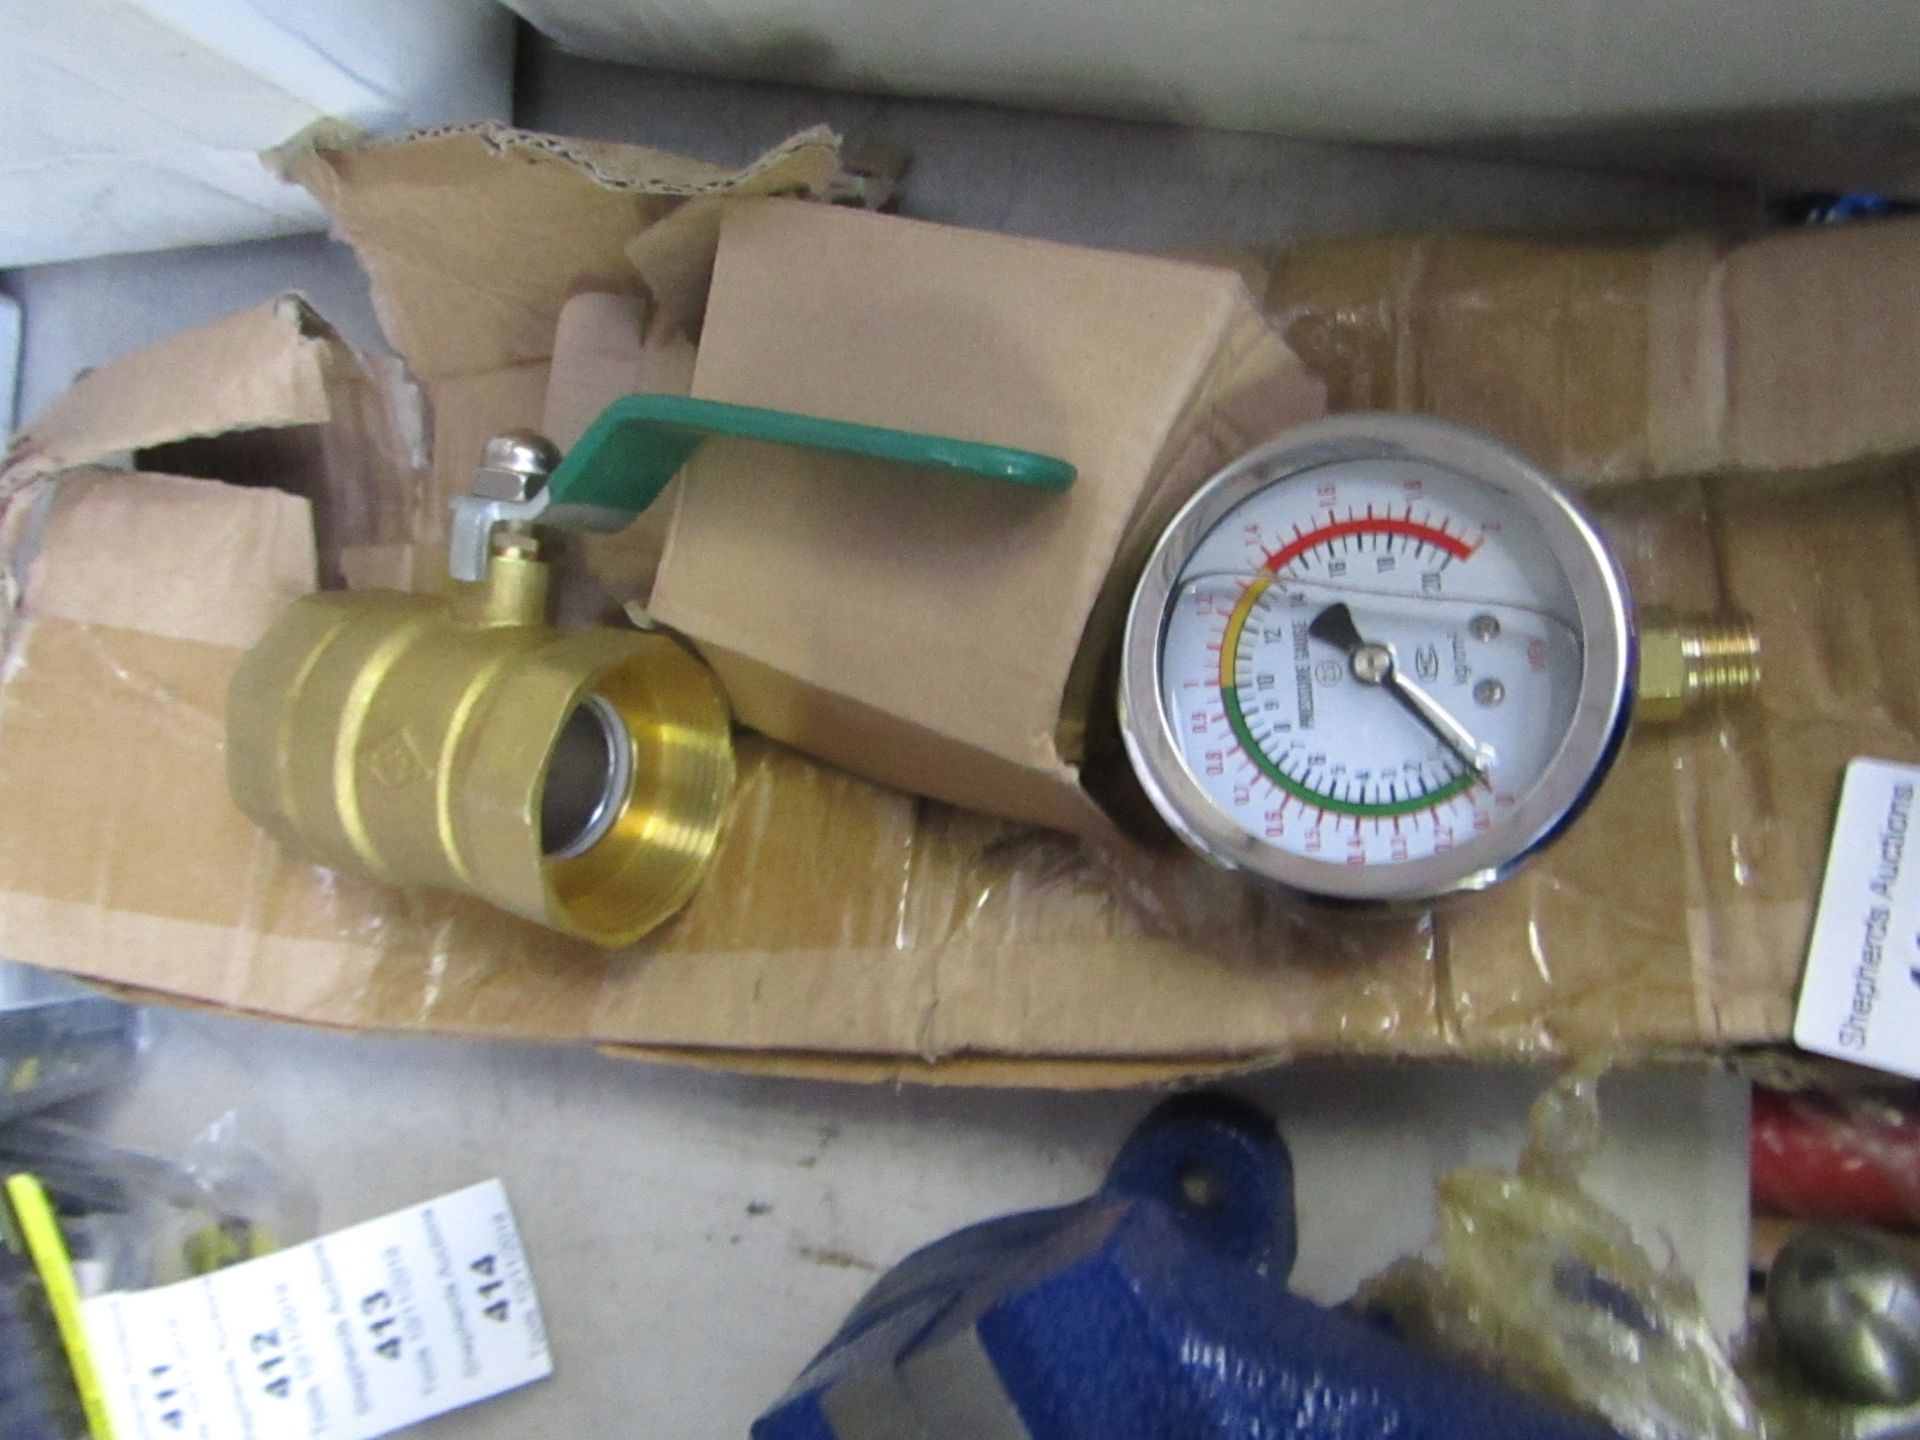 A Pressure gauge and Shut off valve, both look new